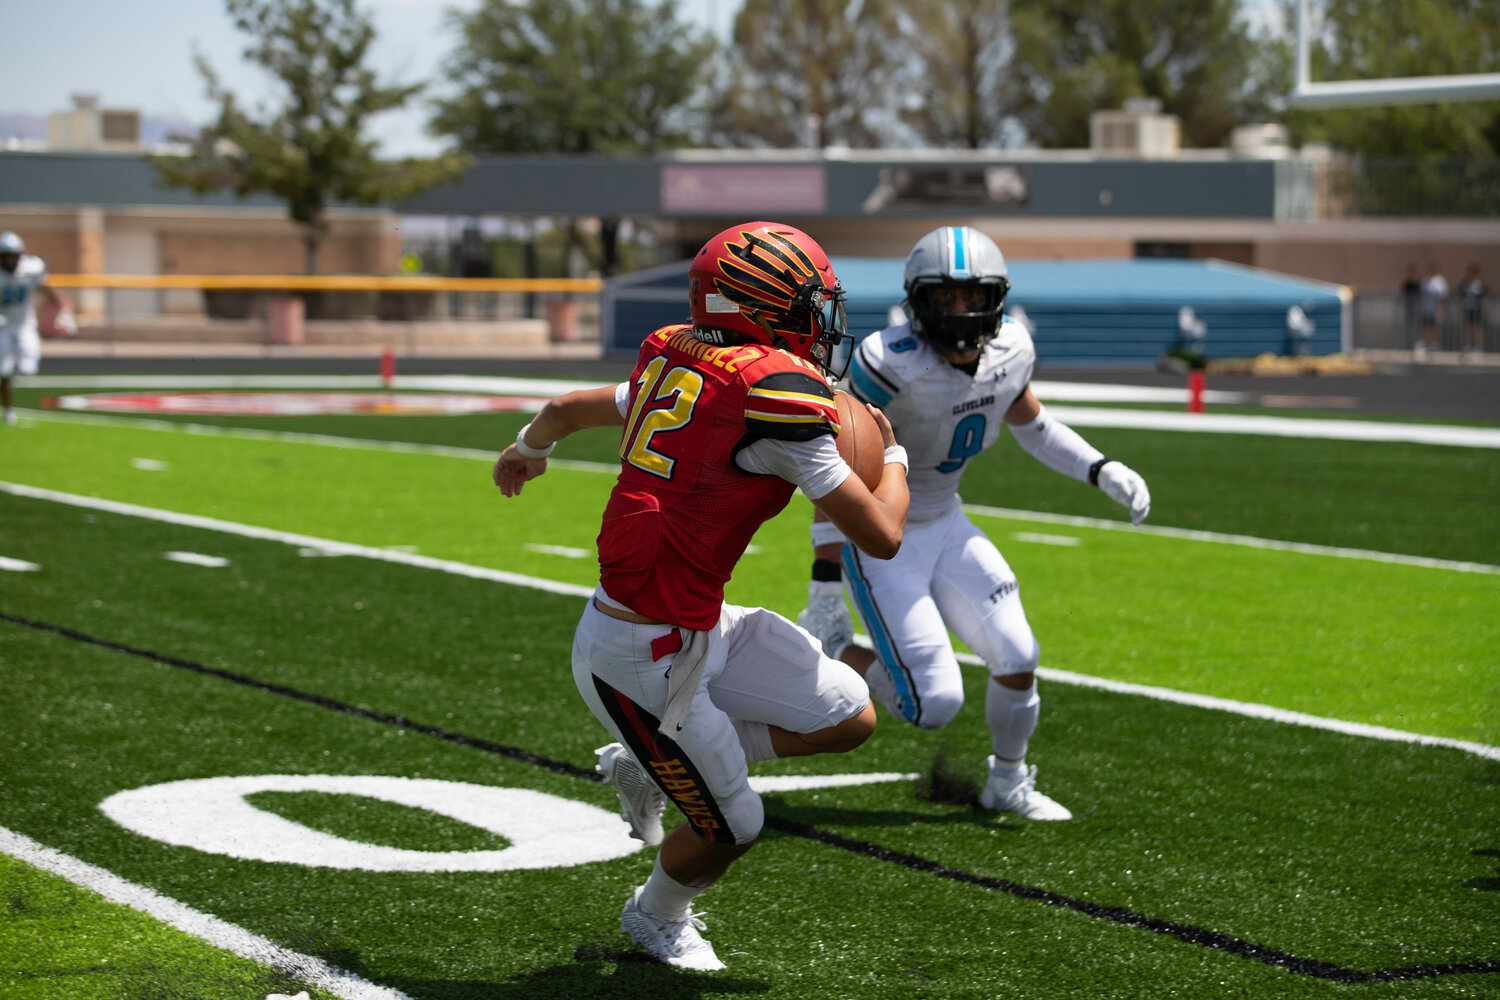 A Centennial High School ballcarrier eyes the end zone Aug. 19 during the Hawks’ 27-8 loss to No. 1-ranked Cleveland High School from Rio Rancho.